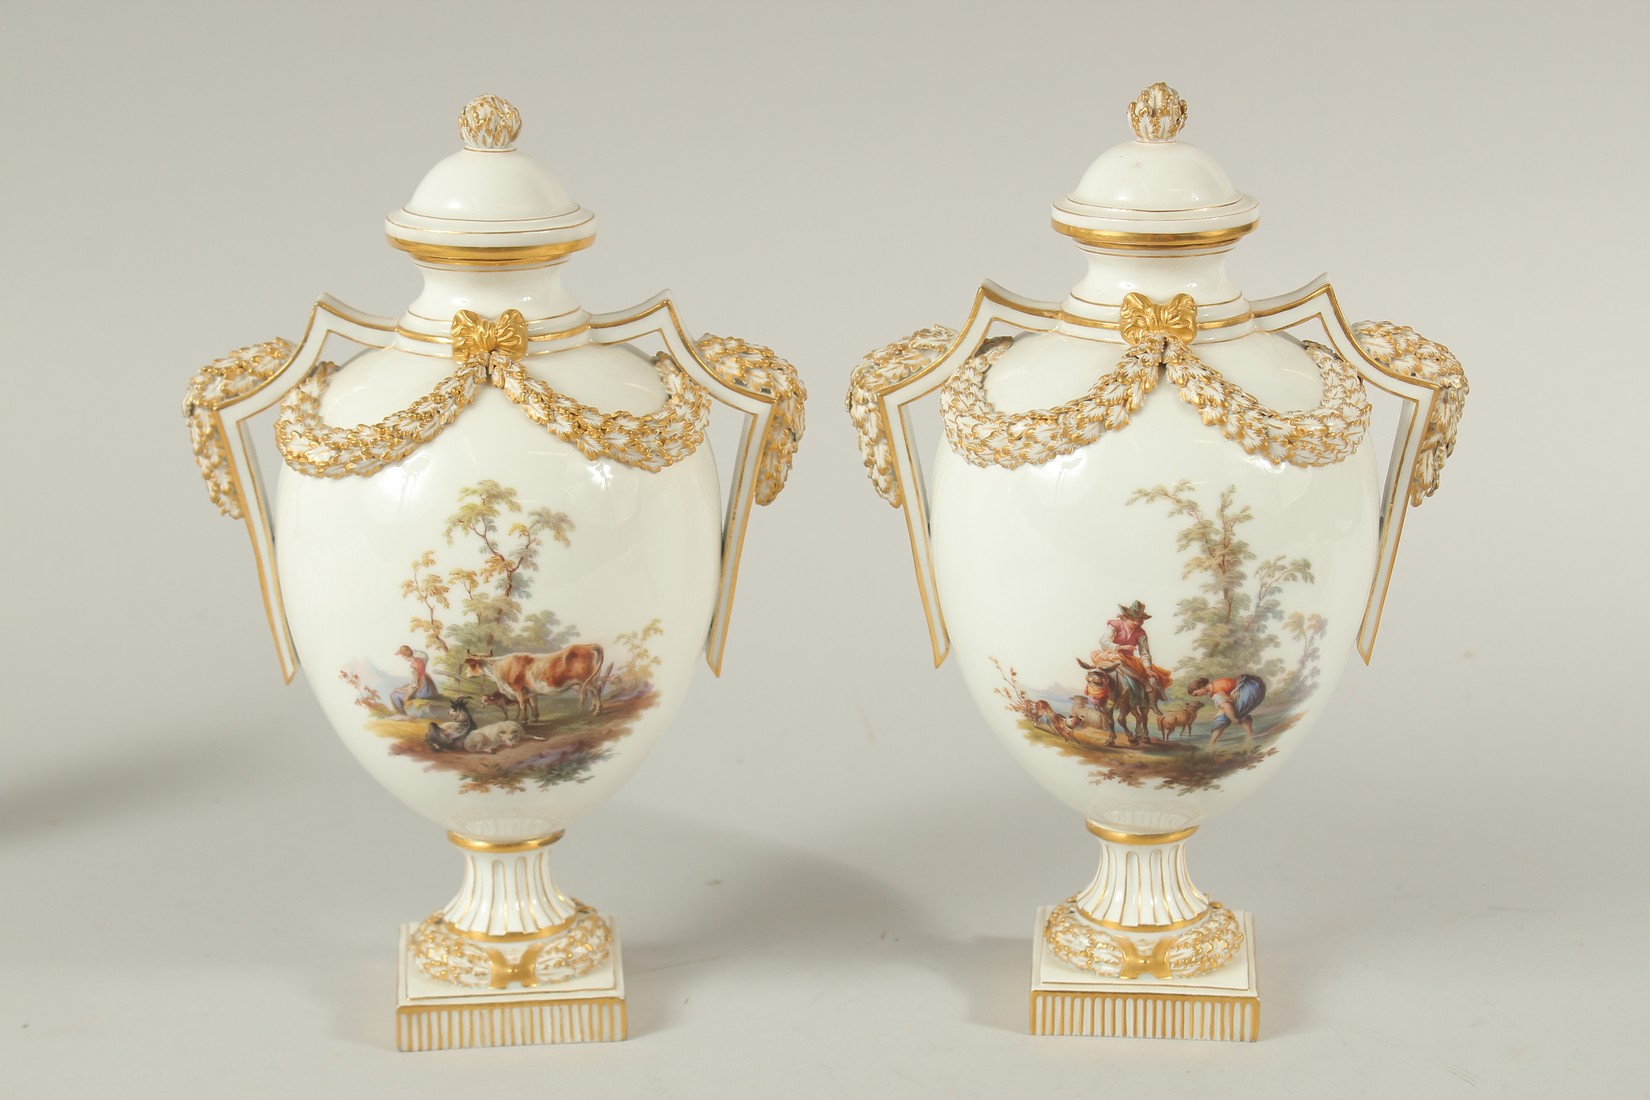 A PAIR OF MEISSEN LIDDED VASES painted with figures in pastoral landscapes. The body of the vases